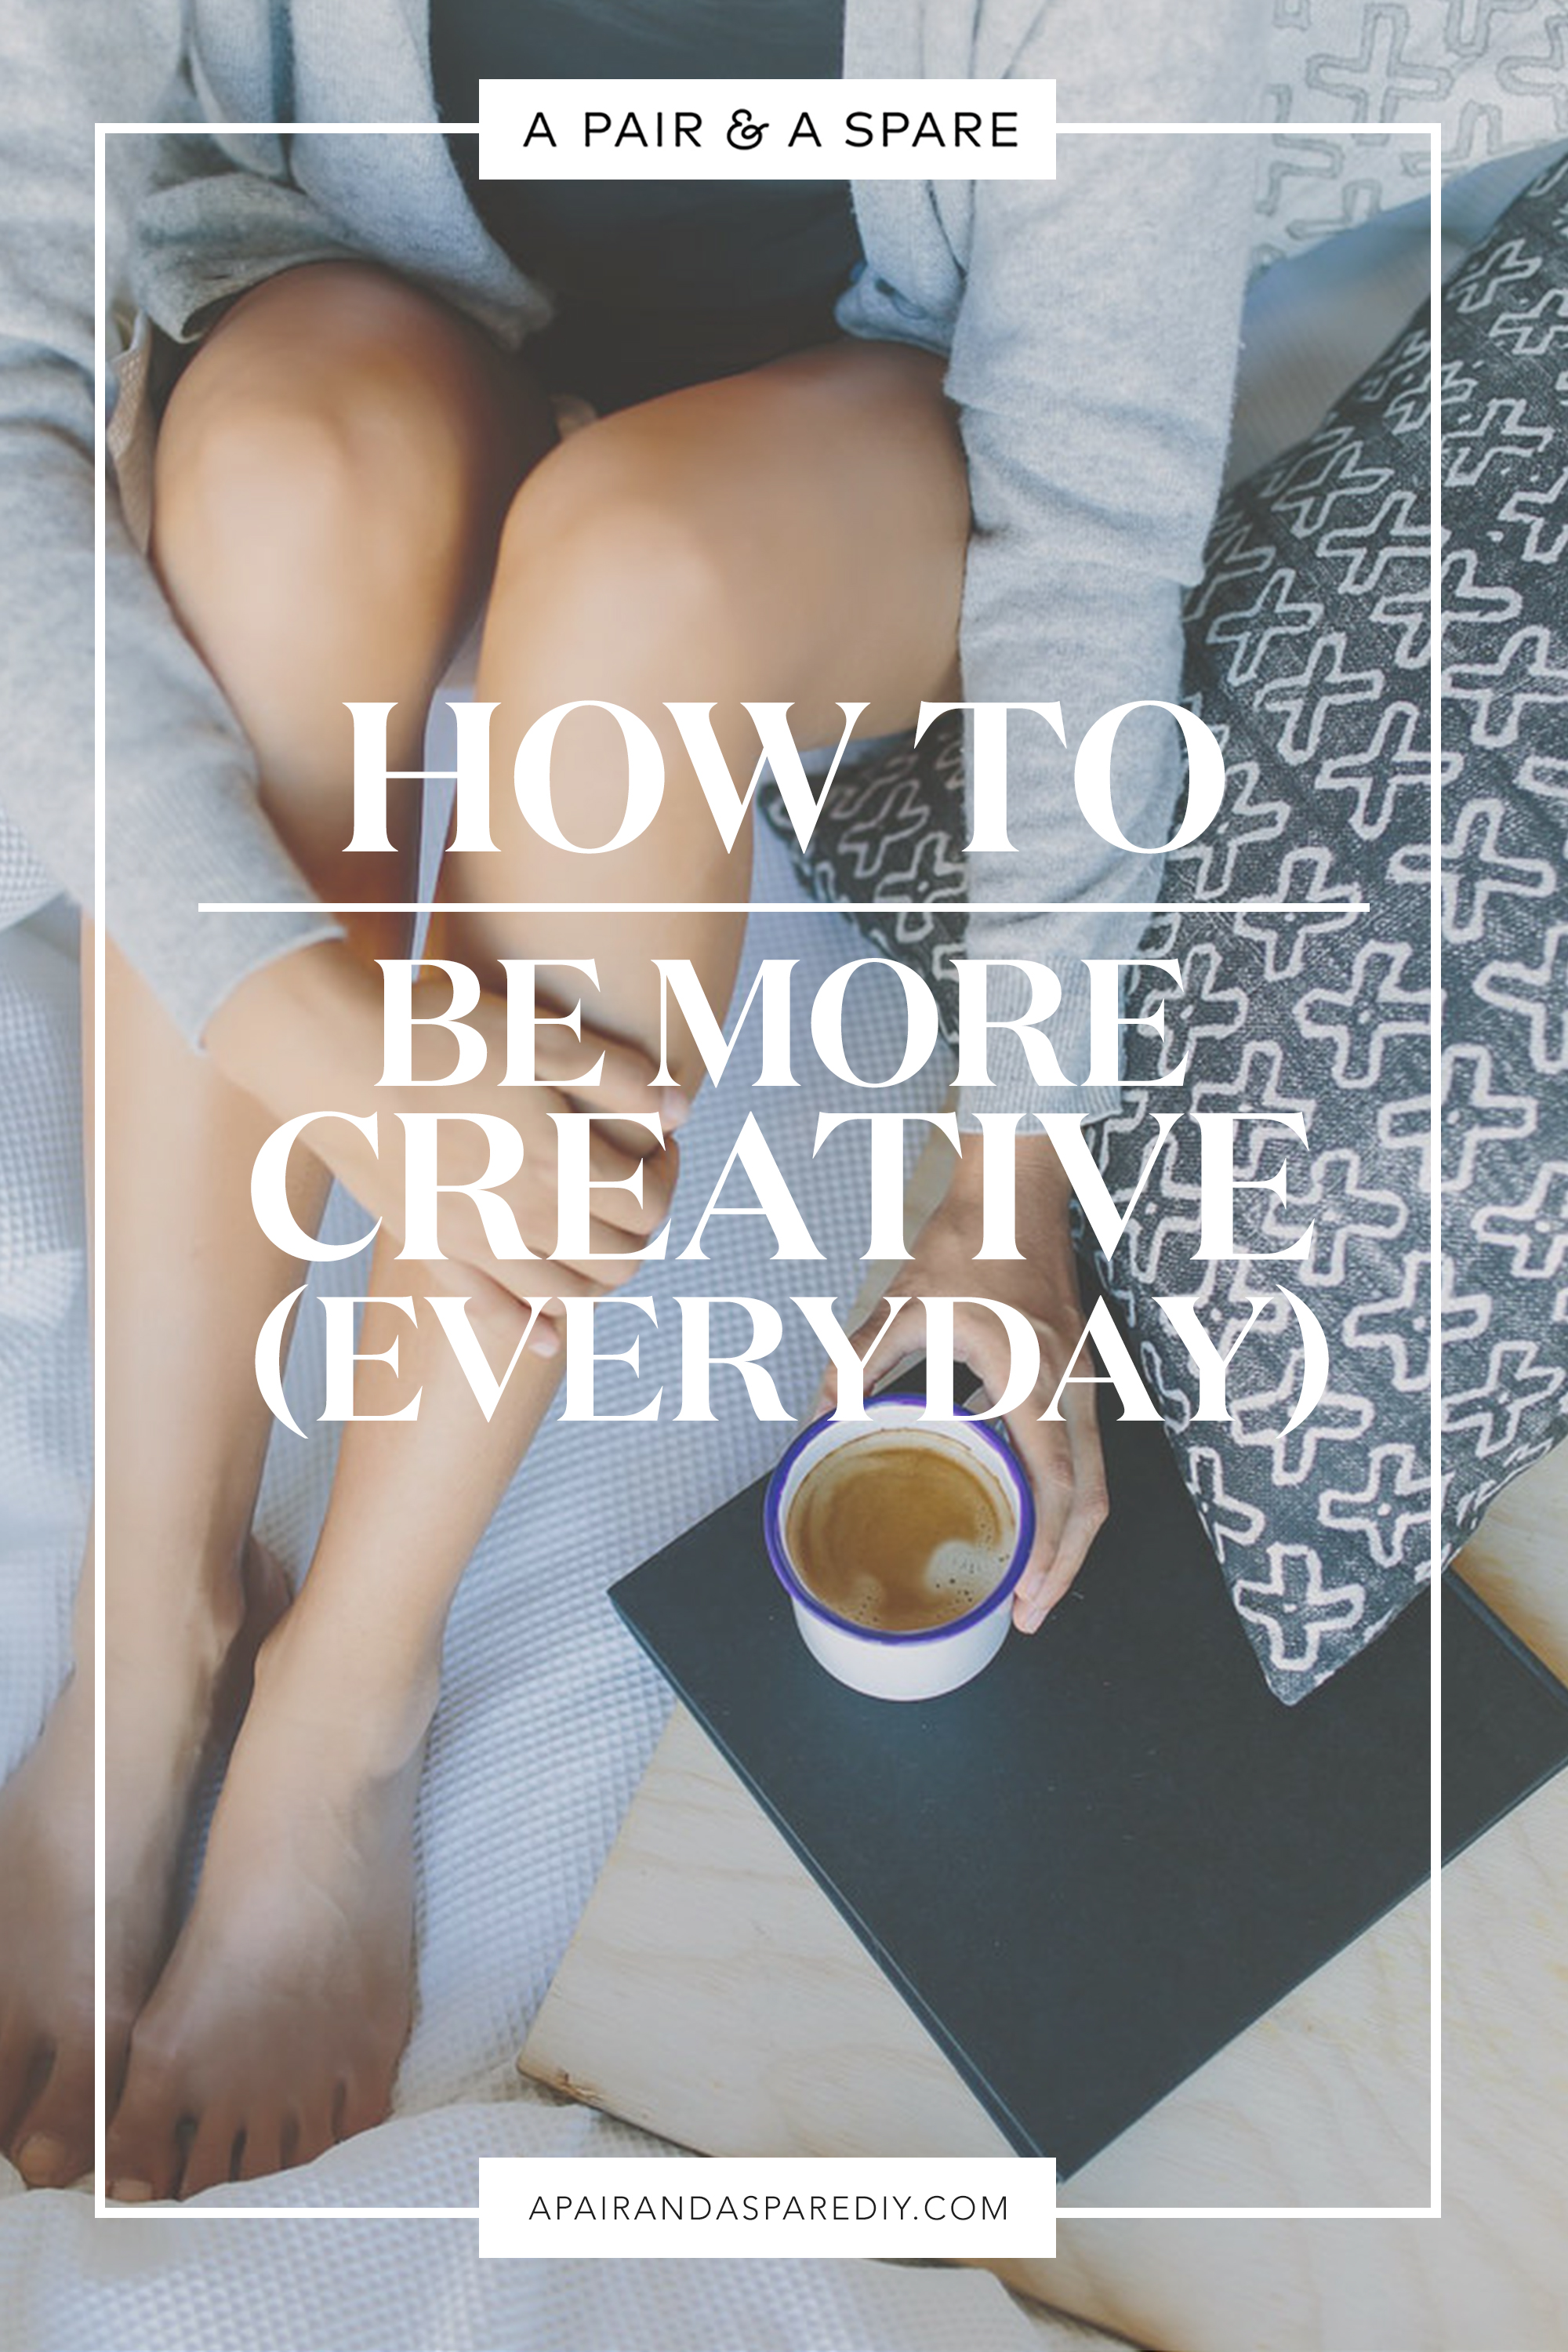 How to be more creative everyday